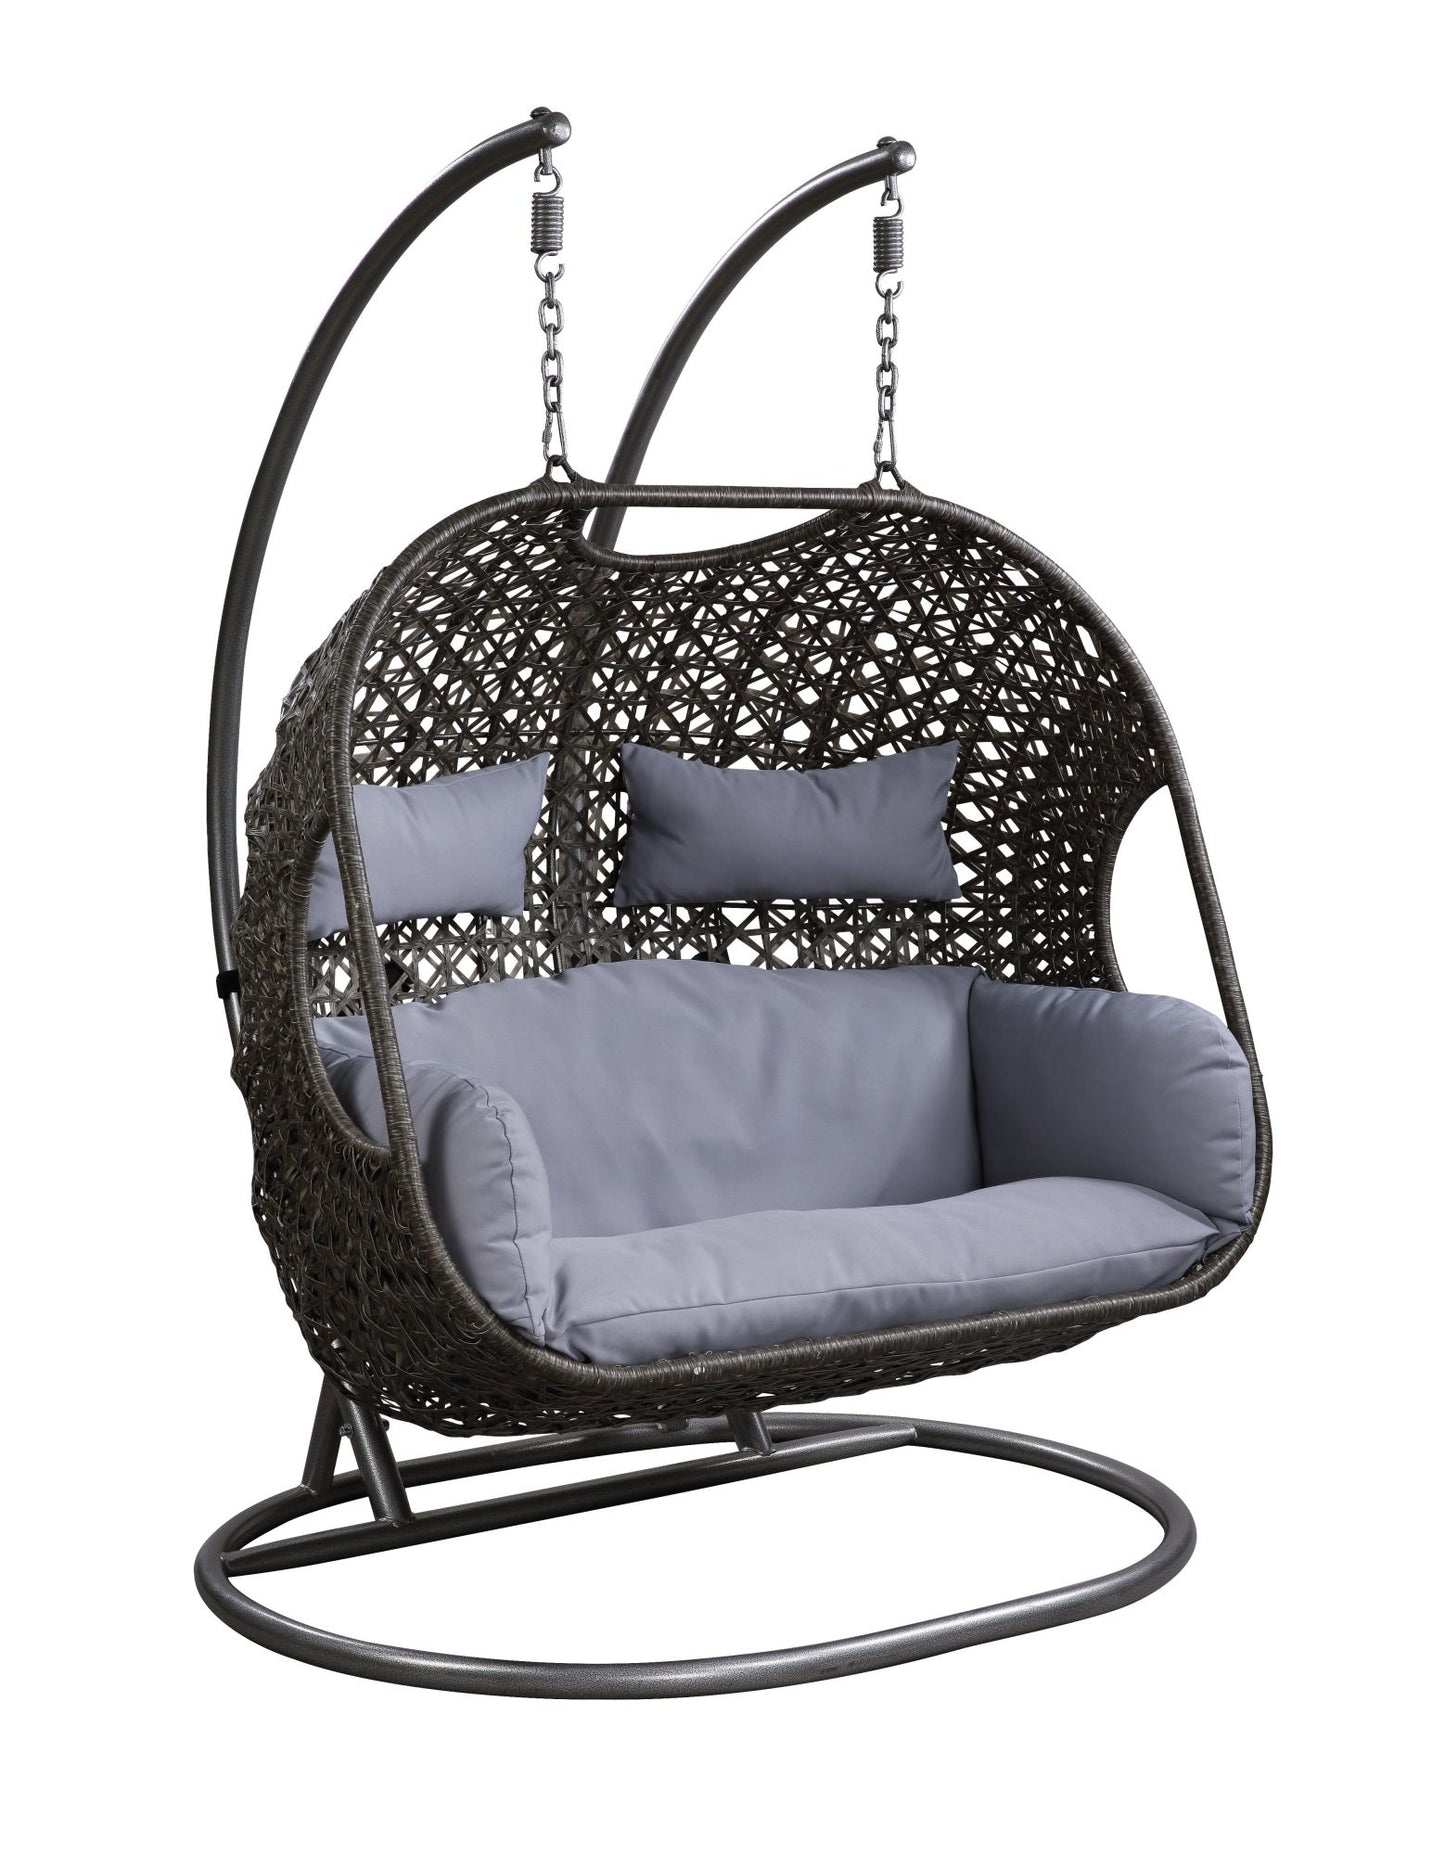 Patio Swing Chair with Stand and Fabric Cusions